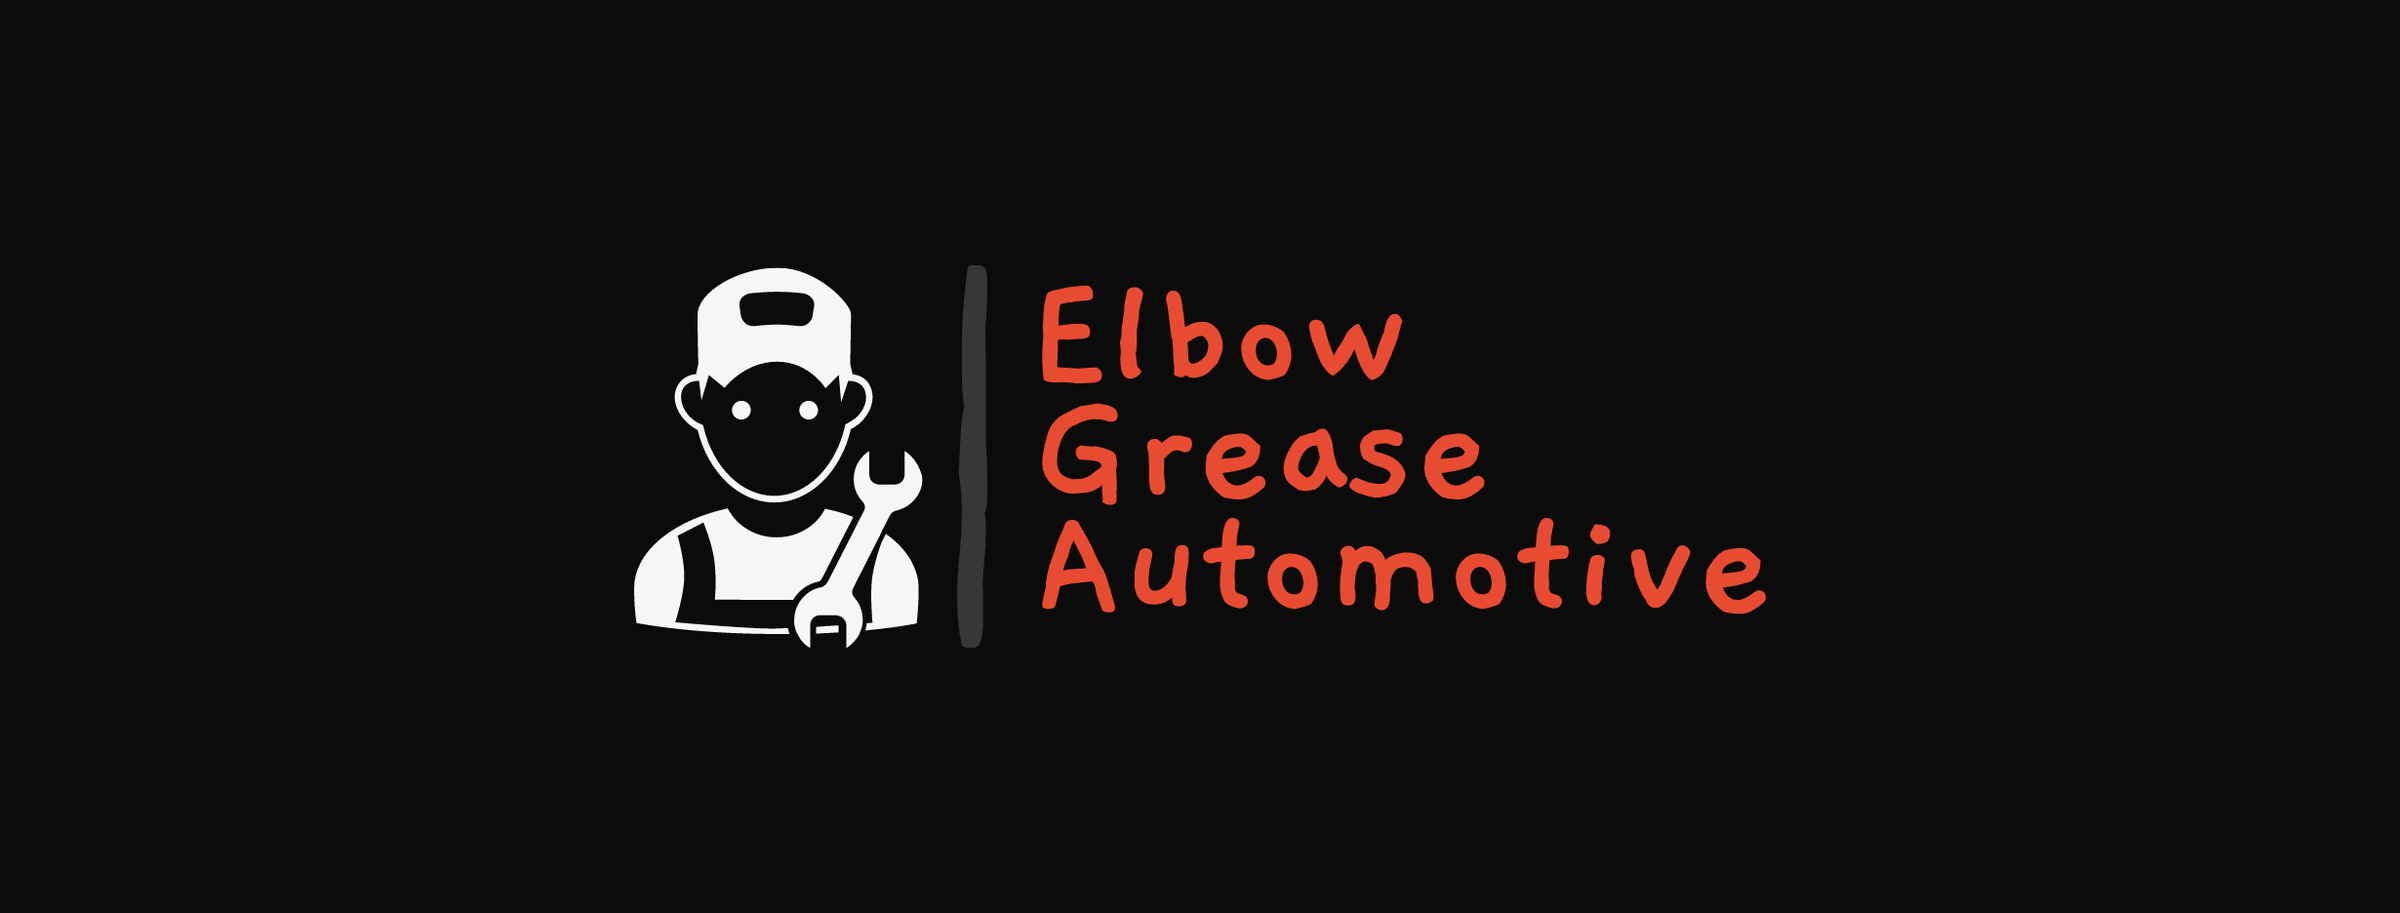 Home - Elbow Grease